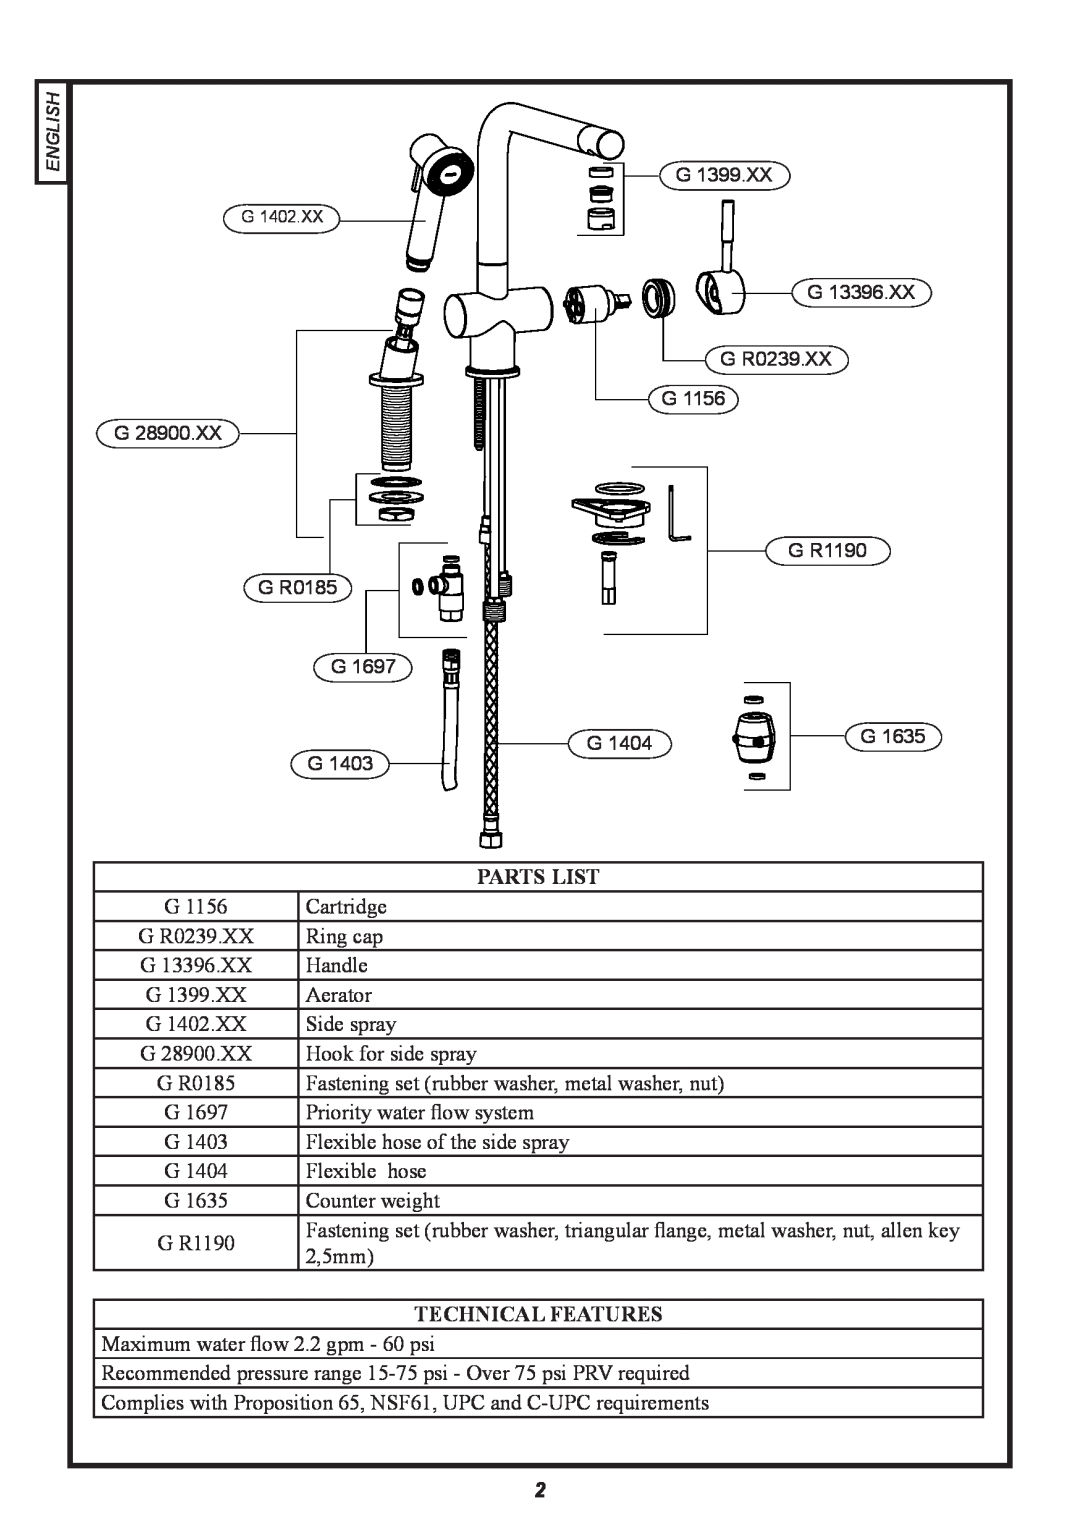 Franke Consumer Products FF 5000 manual Parts List, Technical Features, G G R0185 G G, G G G R0239.XX G G R1190 